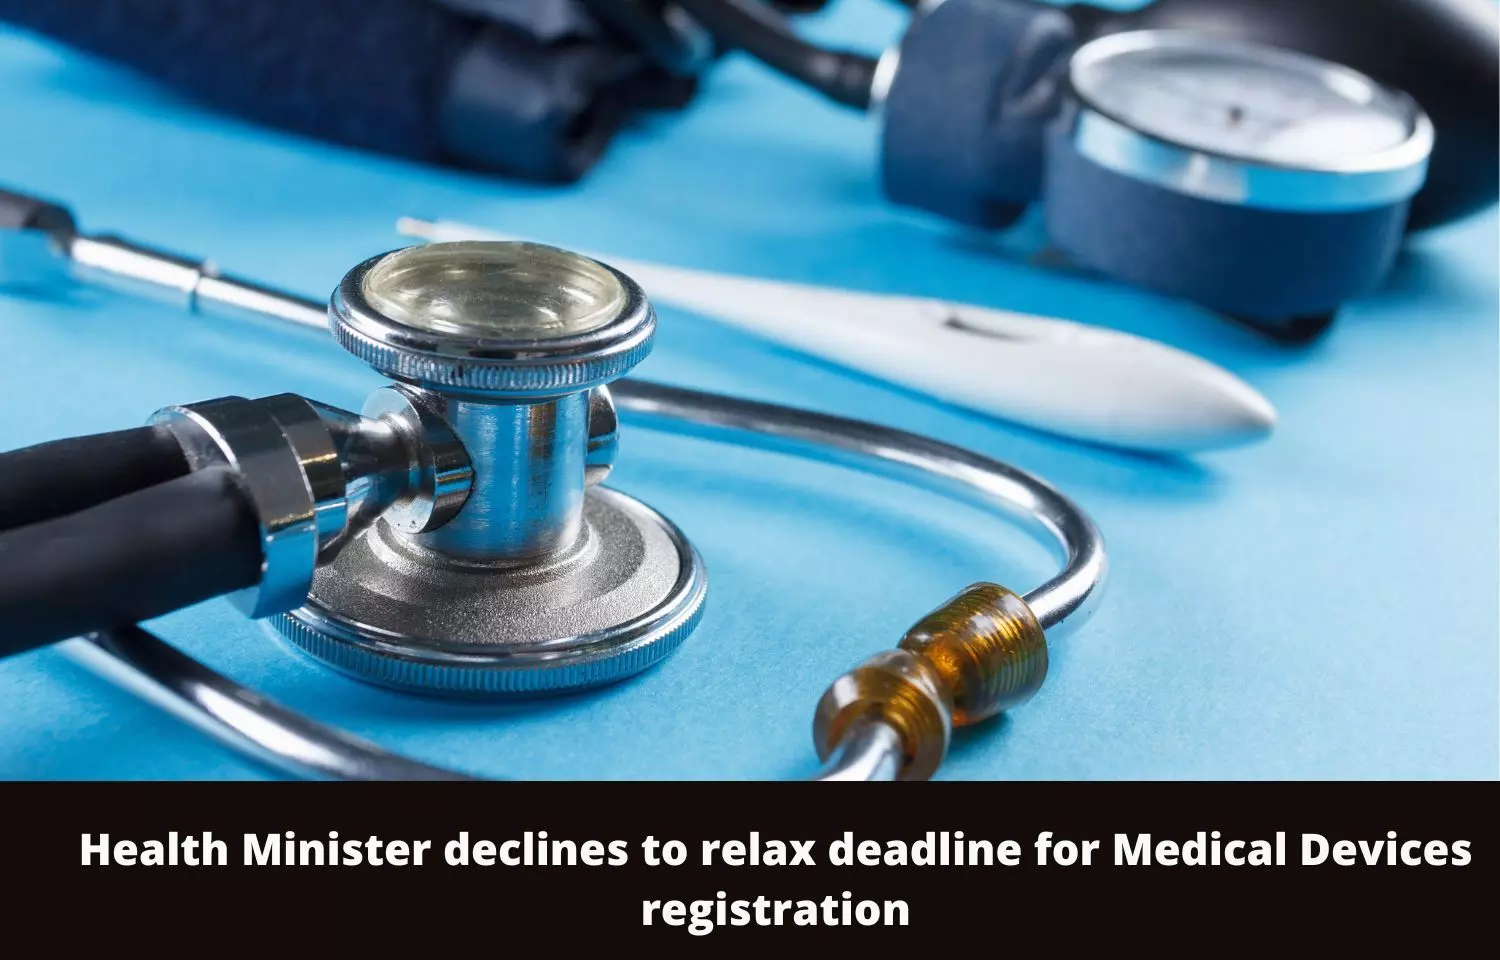 No relief to Medical Device makers: Health Minister declines to relax deadline for registration of medical devices